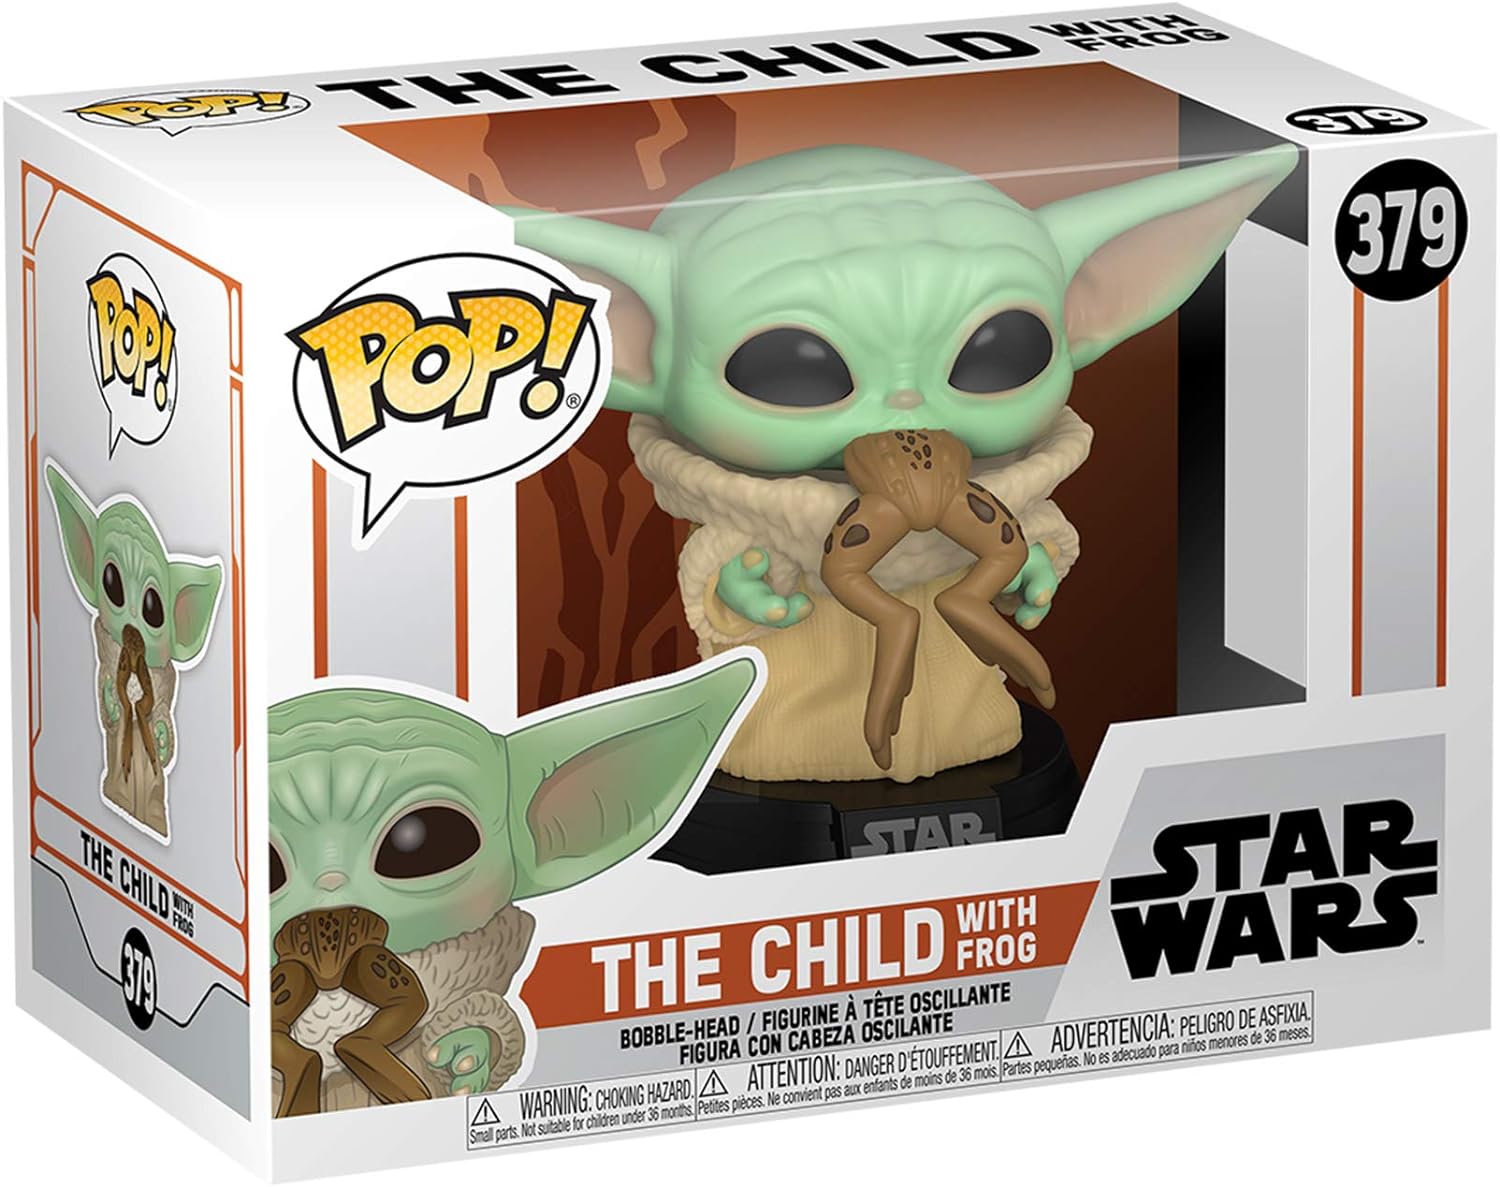 Funko Pop! Star Wars, The Child With Frog #379